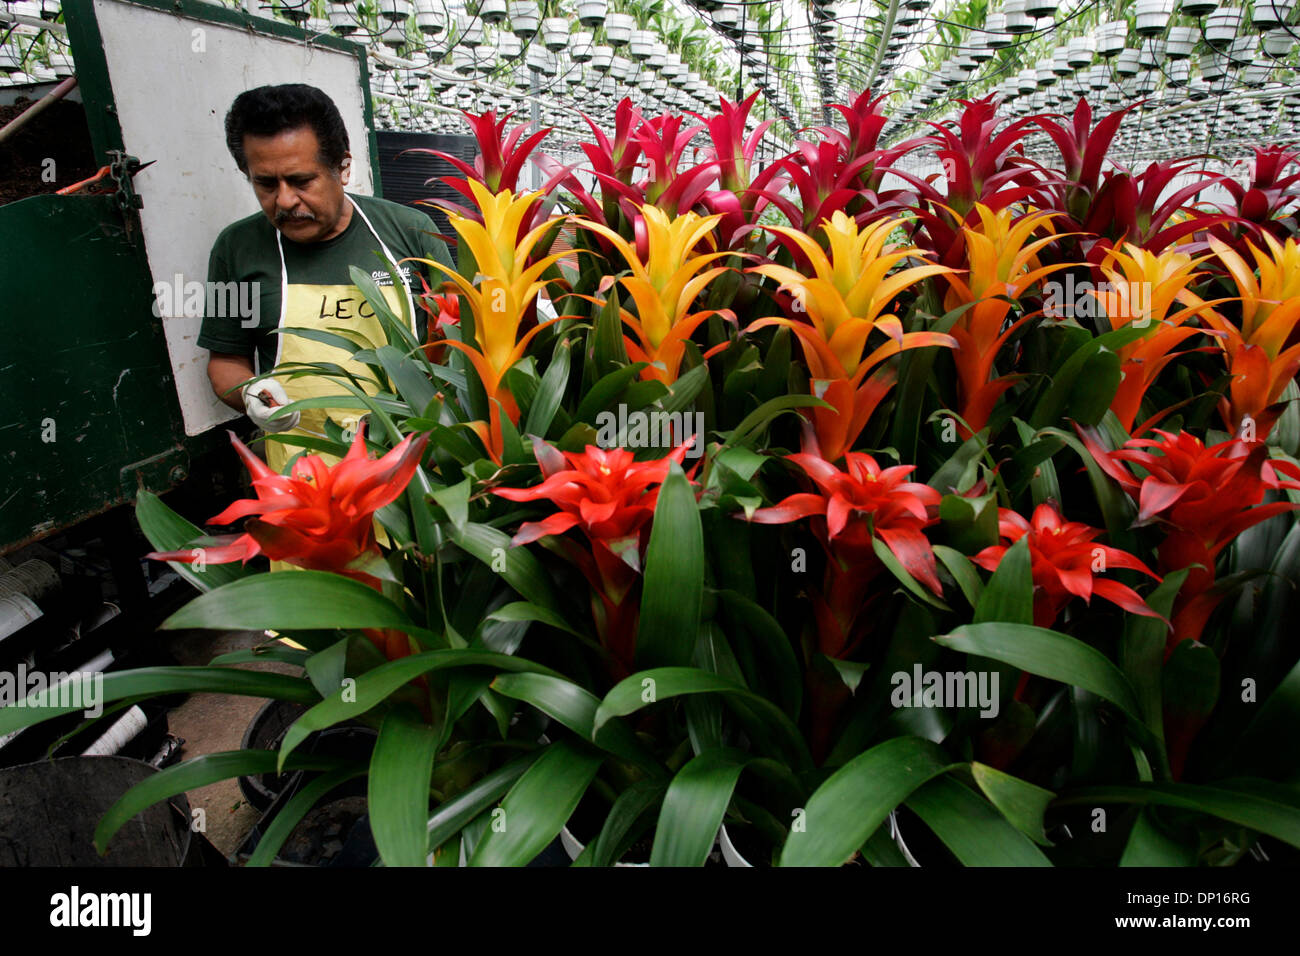 Apr 21, 2006; Fallbrook, CA, USA; LEOPOLDO CALISTO works under a canopy of indoor plants with several varieties of Guzmania Bromeliads to arrange them for shipping from Olive Hill Greenhouses in Fallbrook. The company is a big producer of bromeliads, orchids and indoor plants.  Mandatory Credit: Photo by Laura Embry/SDU-T /ZUMA Press. (©) Copyright 2006 by SDU-T Stock Photo